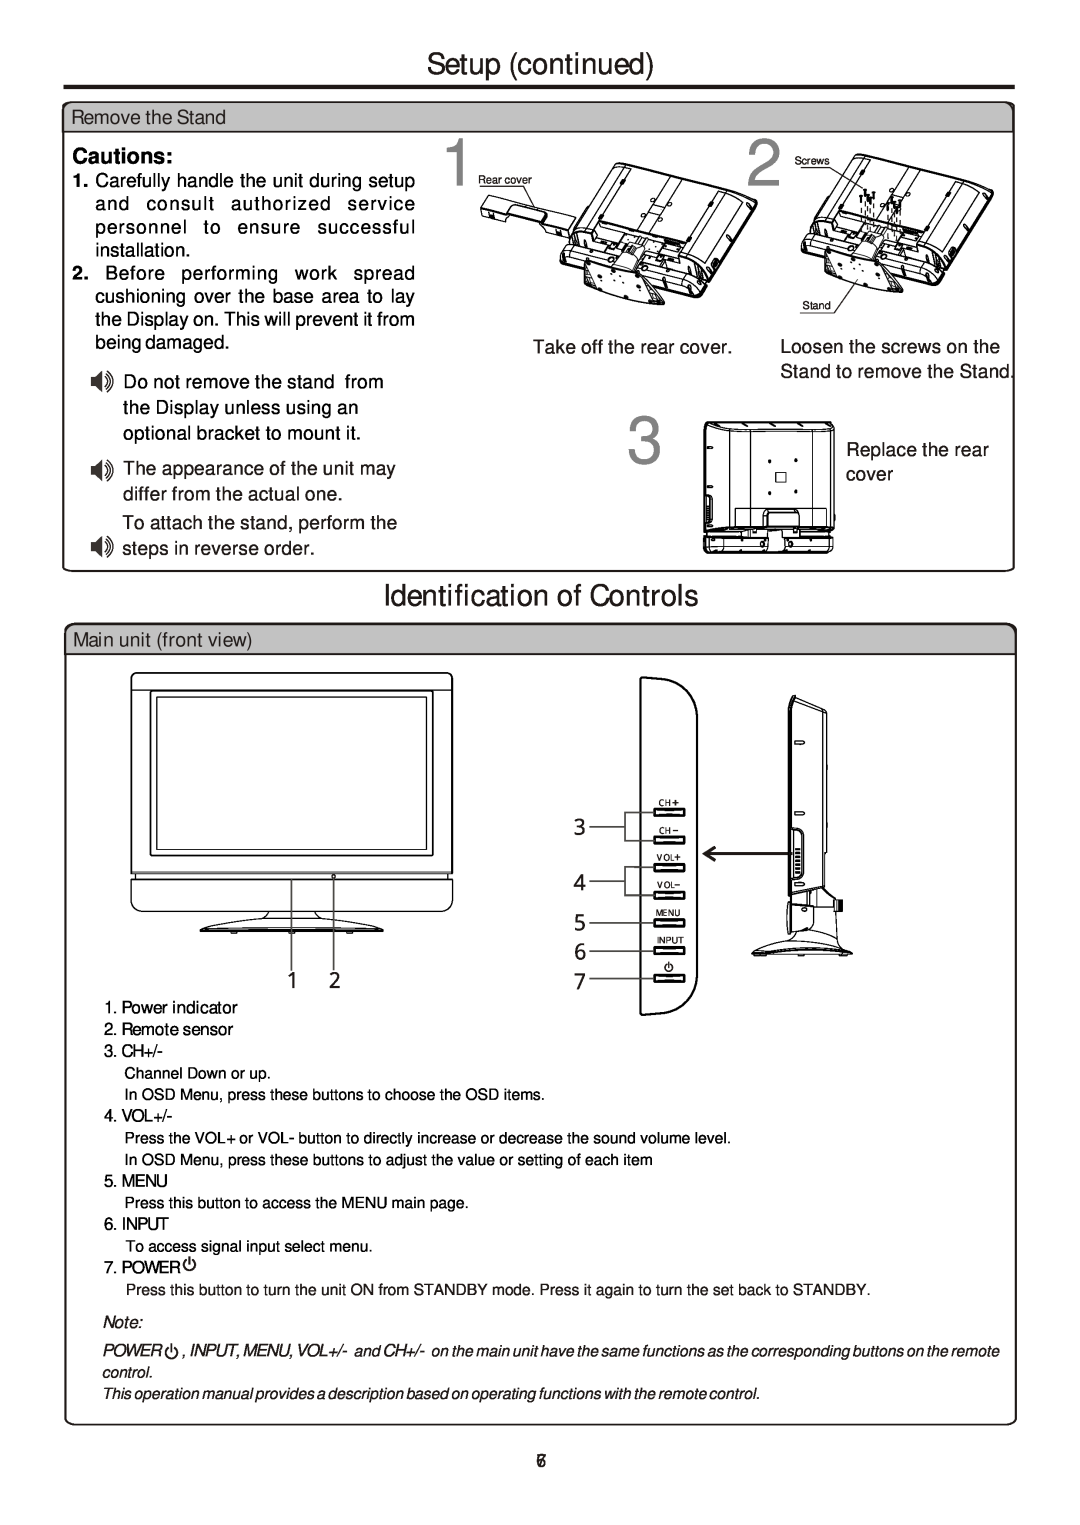 Sanyo 263, AVL-261, 323, 321 instruction manual Setup continued, Remove the Stand, Main unit front view, Cautions 